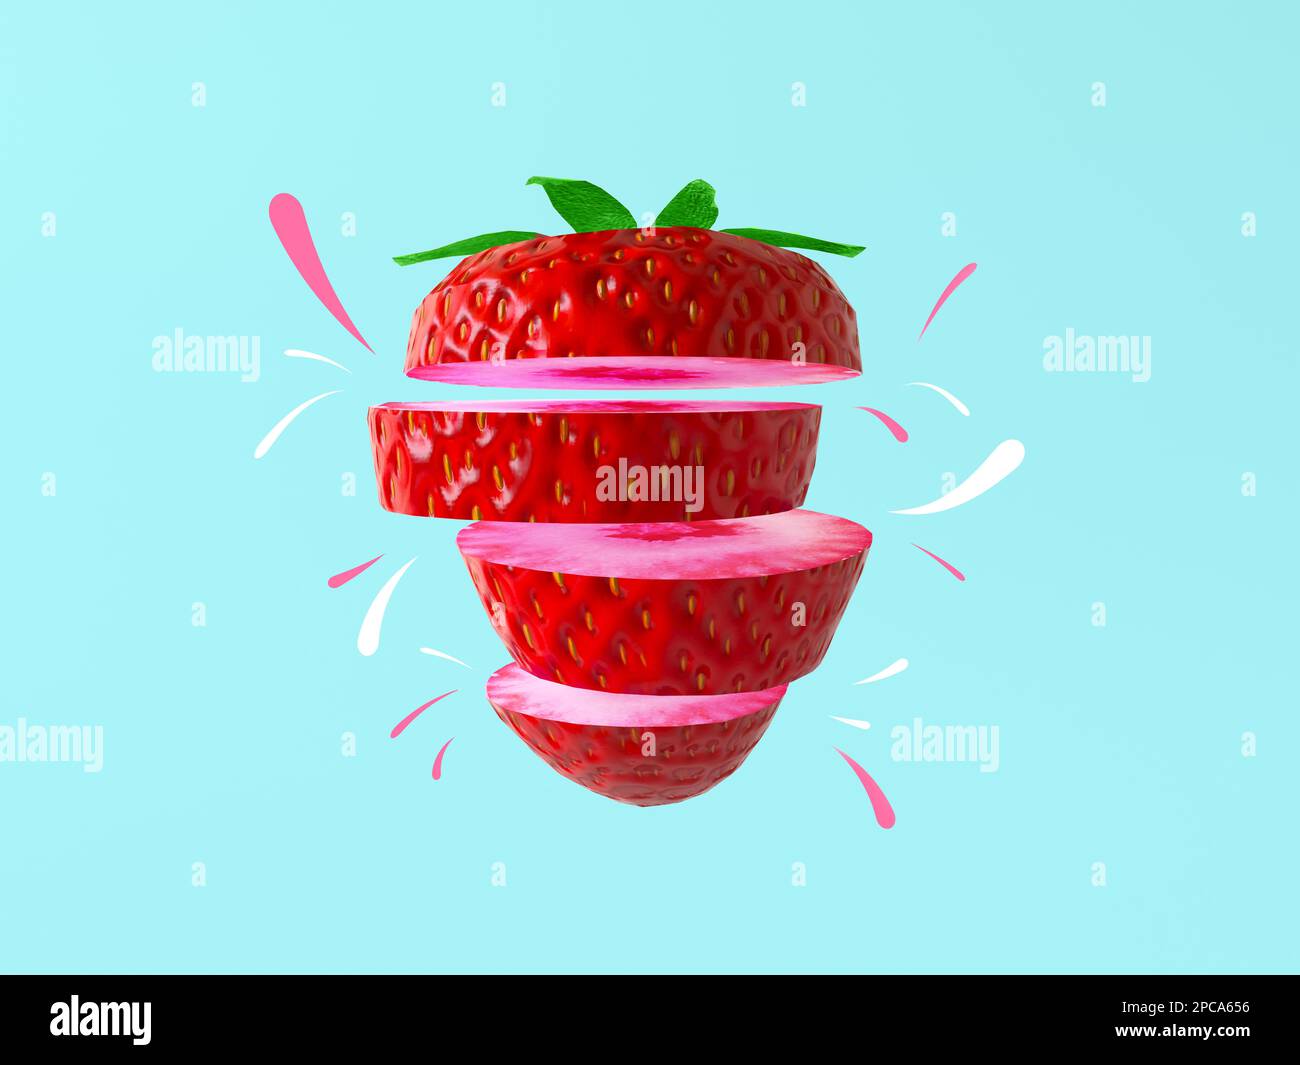 Red sliced strawberry isolated on blue background. Floating tasty strawberry with green leaves and juicy cartoon comic white drops. Fresh creative Stock Photo